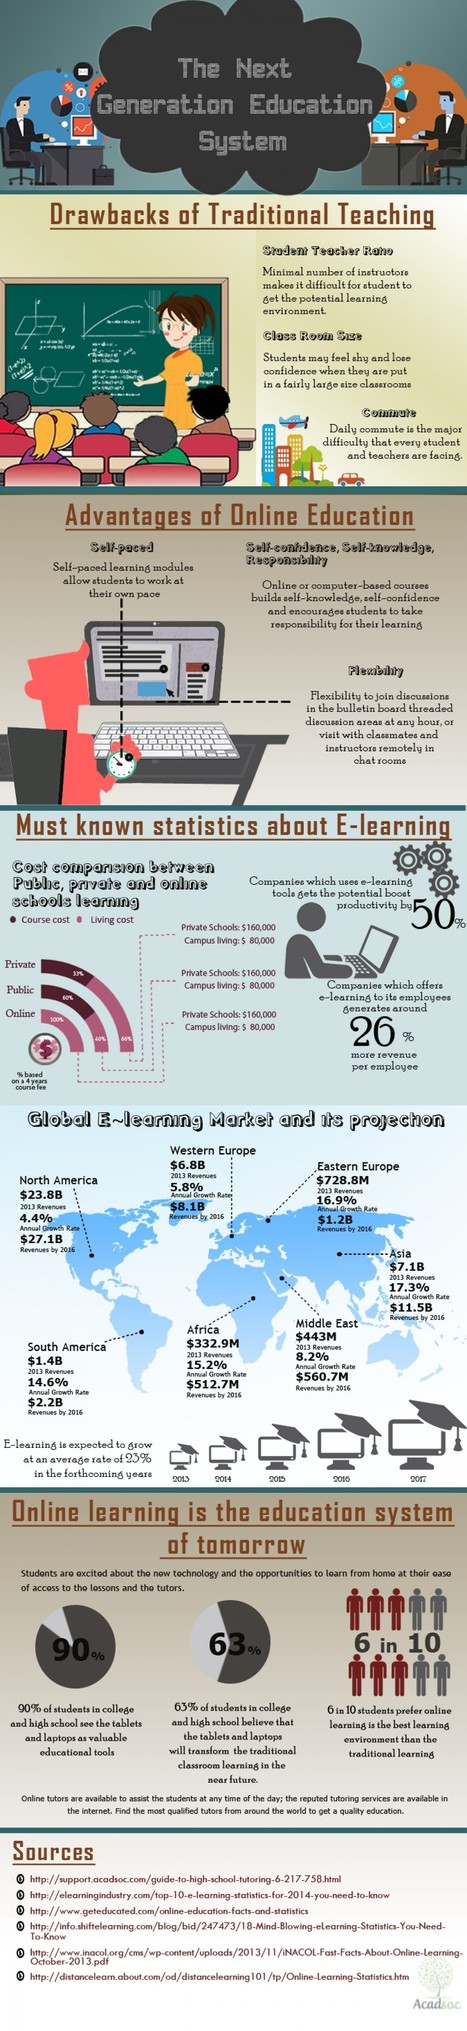 The next generation of education system [Infographic] | Pedalogica: educación y TIC | Scoop.it